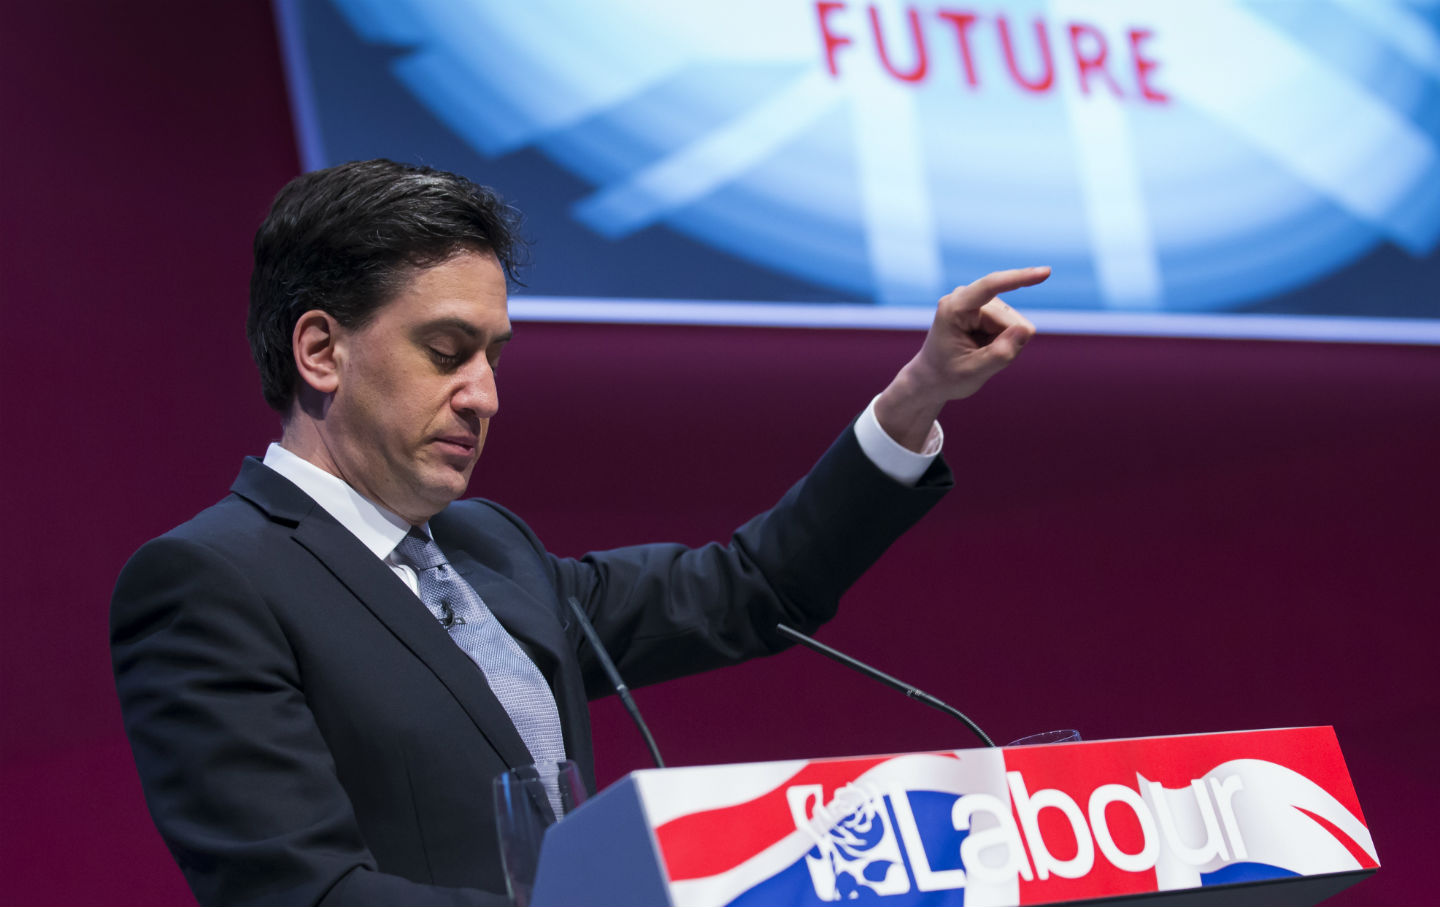 Why Ed Miliband Might Not Be Britain’s Next Prime Minister